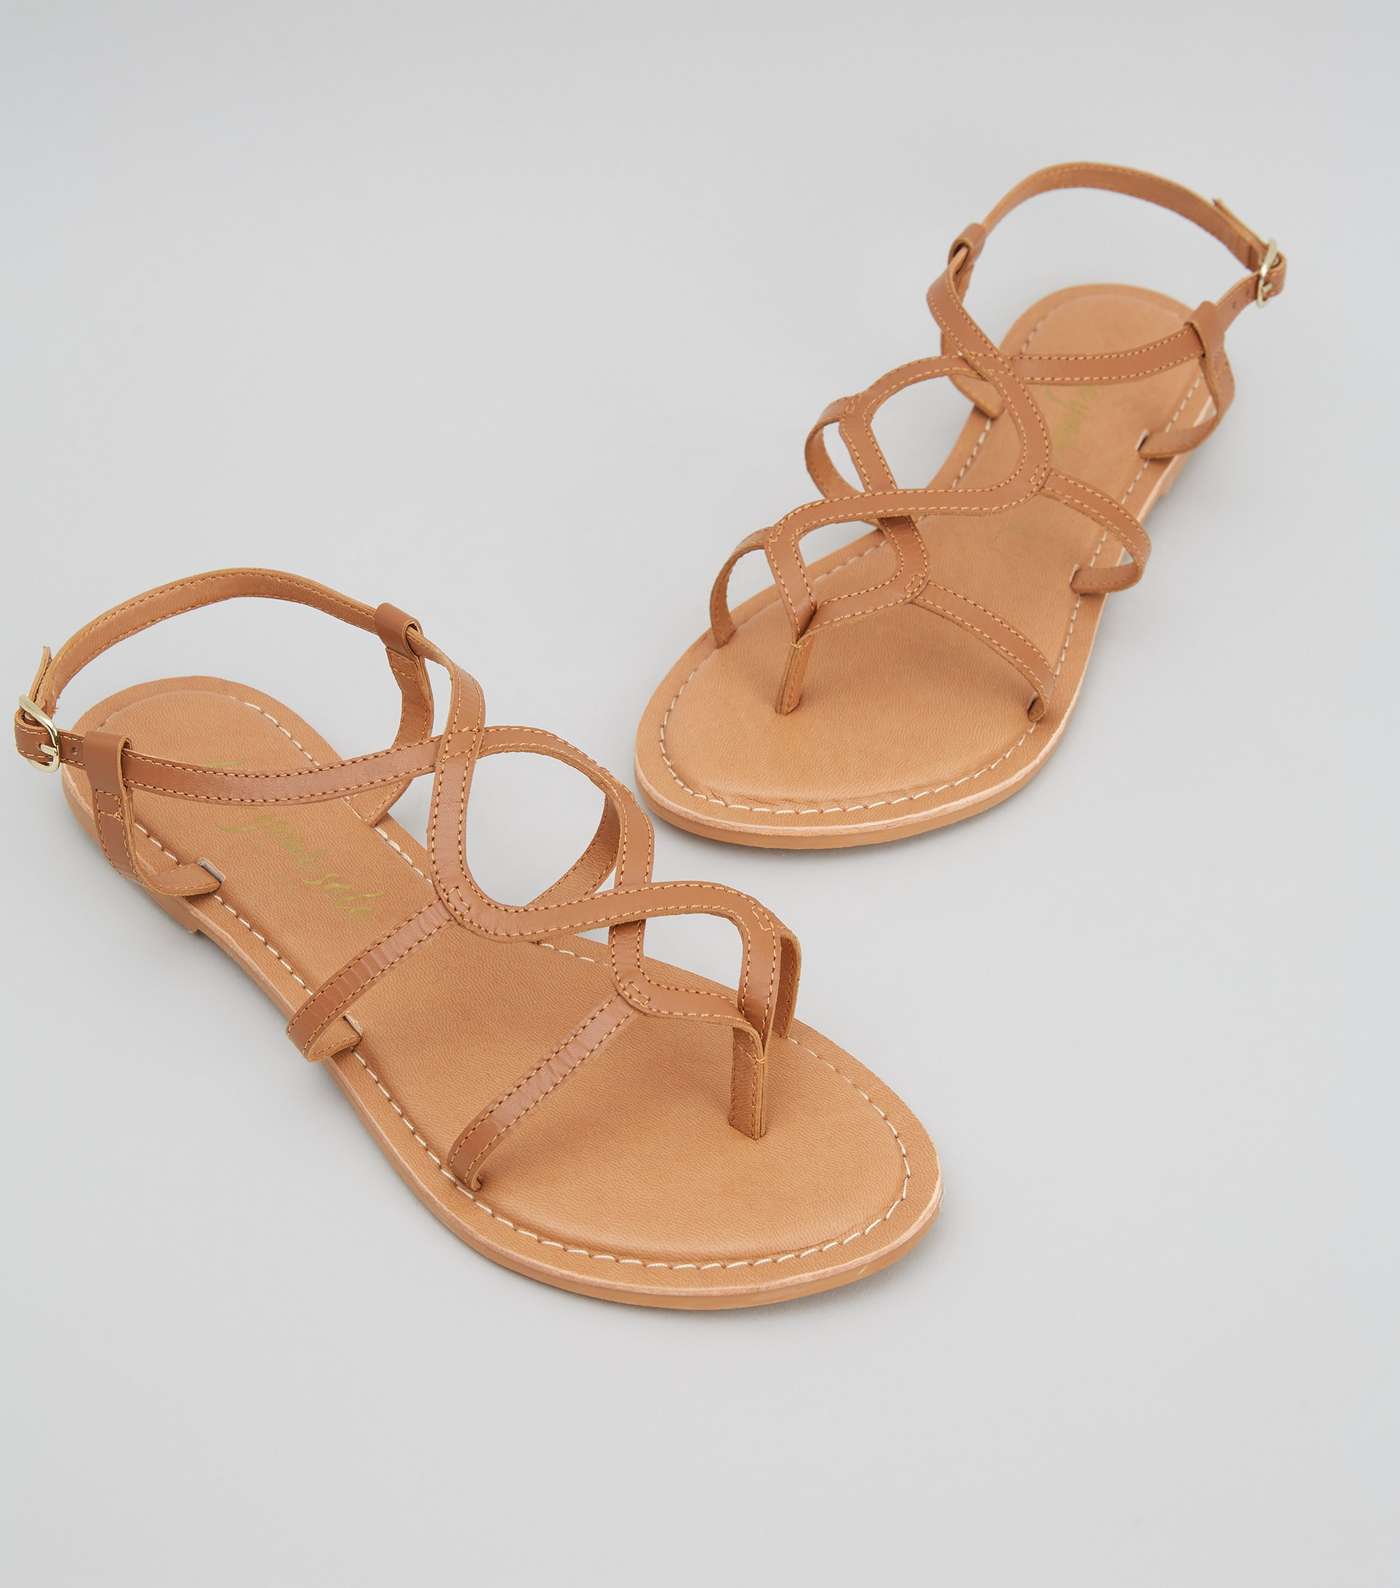 Tan Leather Twist Strappy Sandals Image 3